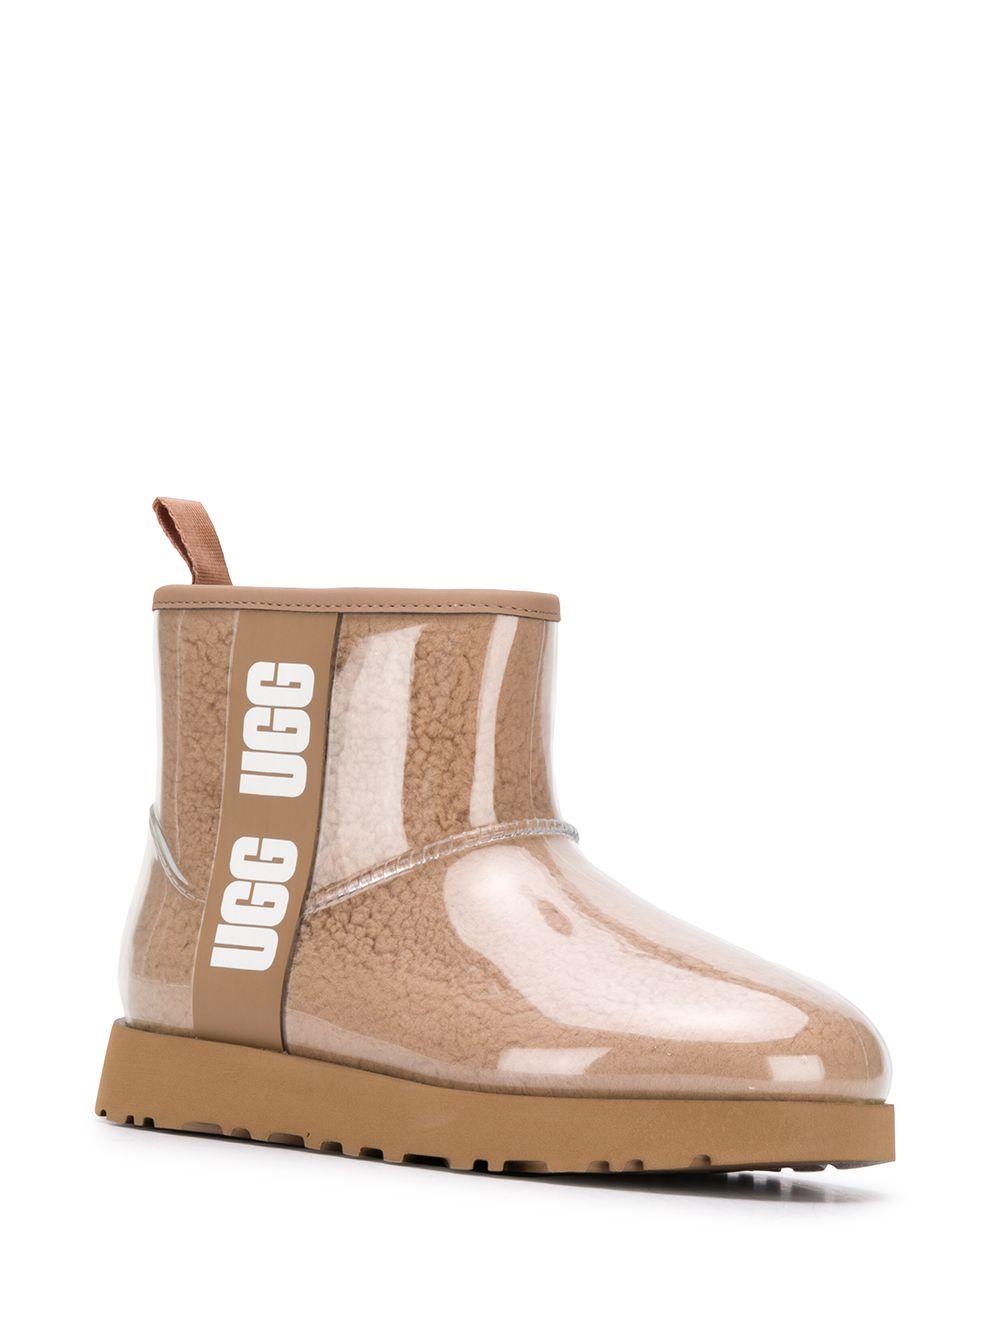 UGG Mini Classic Clear Boots in Beige (Natural) | Lyst